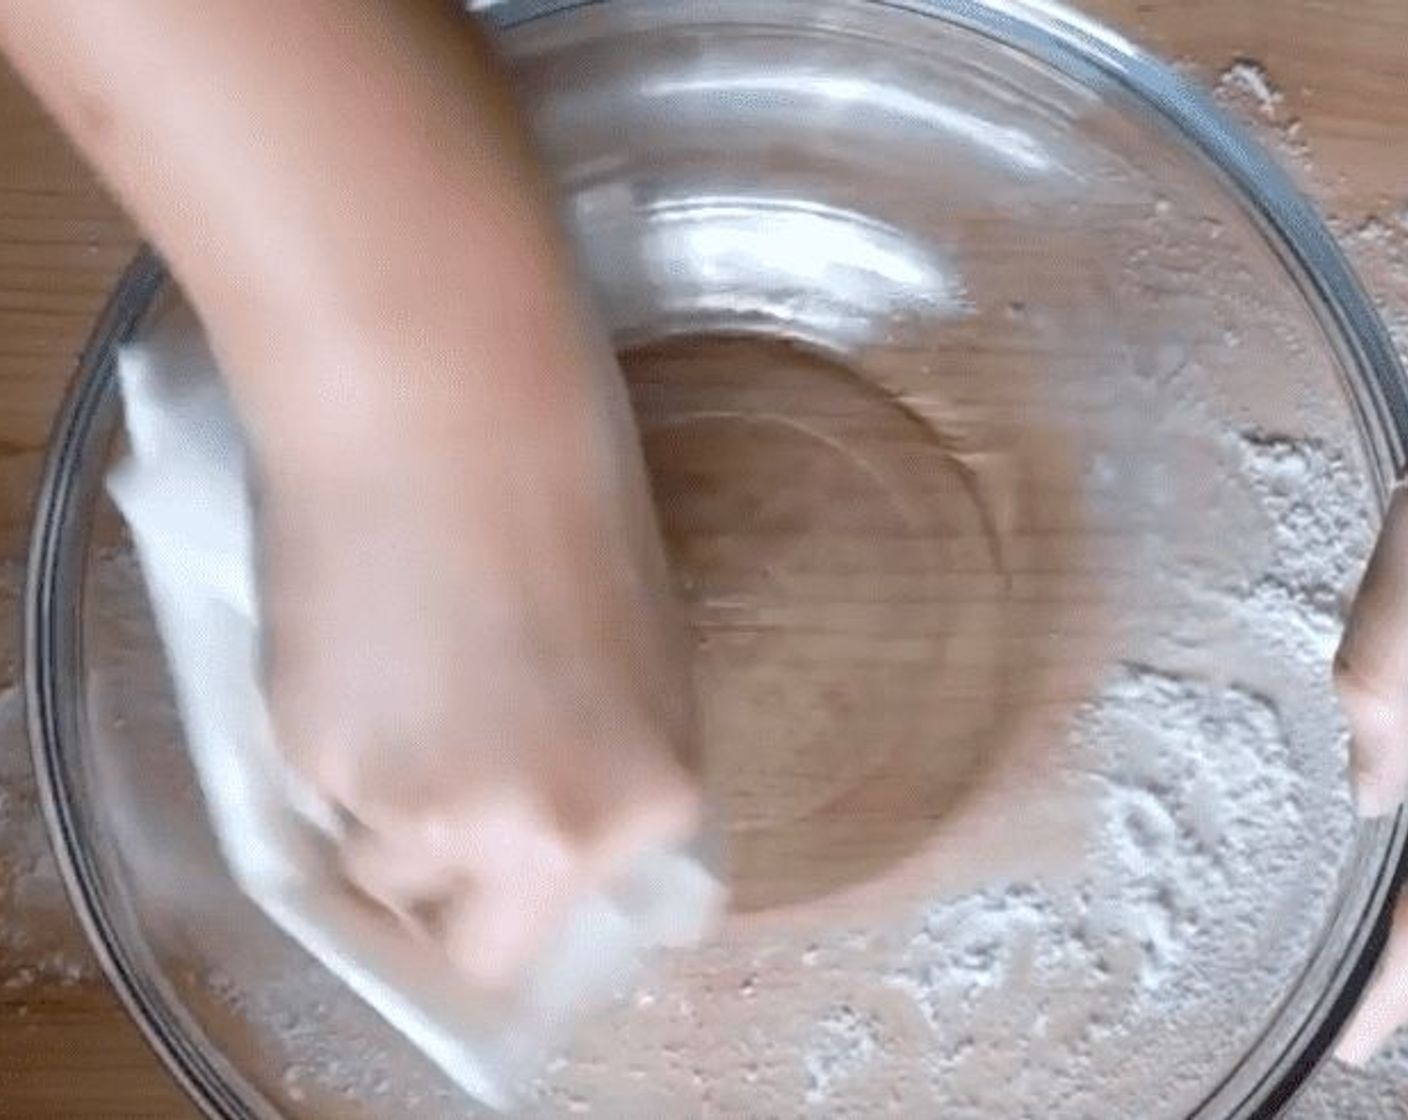 step 4 Add Peanut Oil (1 tsp) to a clean bowl and wipe with paper towel to coat the bowl with oil. Place the dough in the bowl and cover with plastic wrap or a damp towel. Let the dough rest for 20 to 30 minutes.